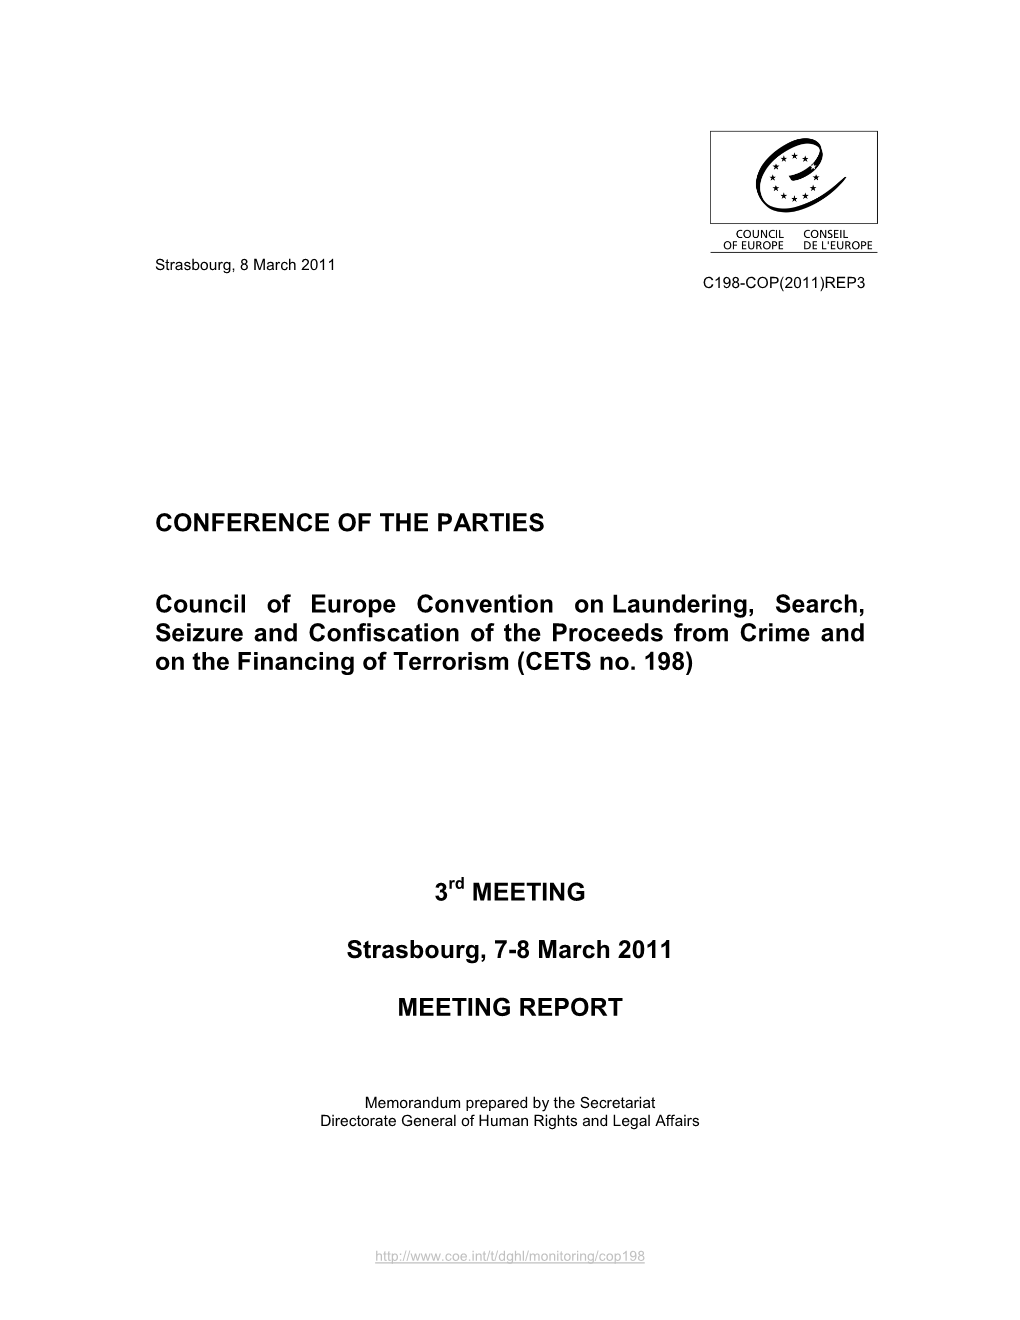 Conference of the Parties